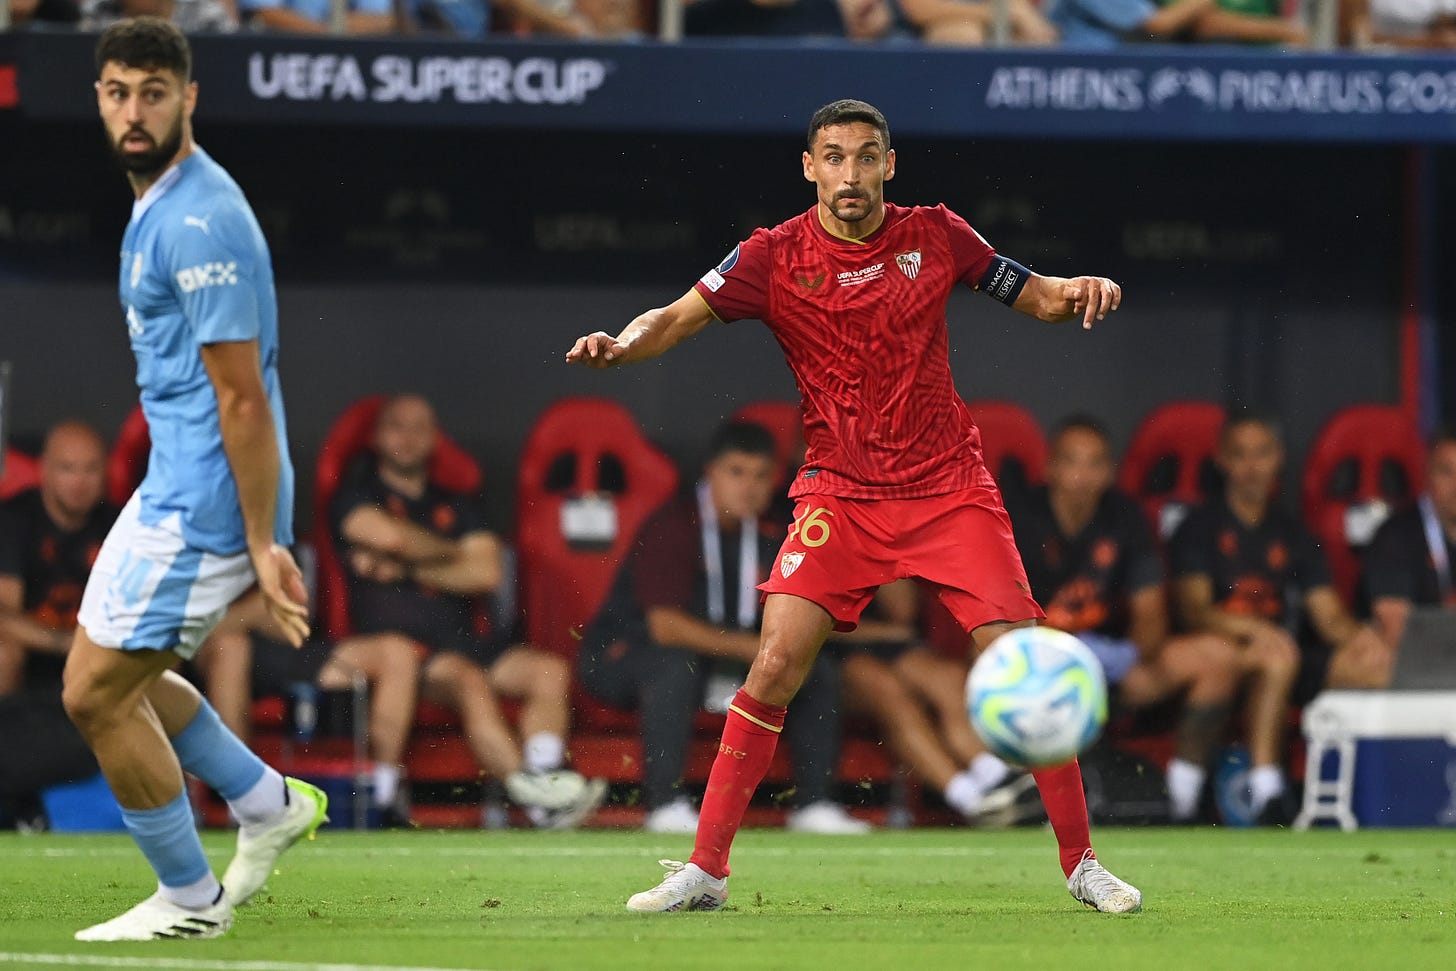 Jesus Navas pictured (right) playing for Sevilla against former club Manchester City in the 2023 UEFA Super Cup final